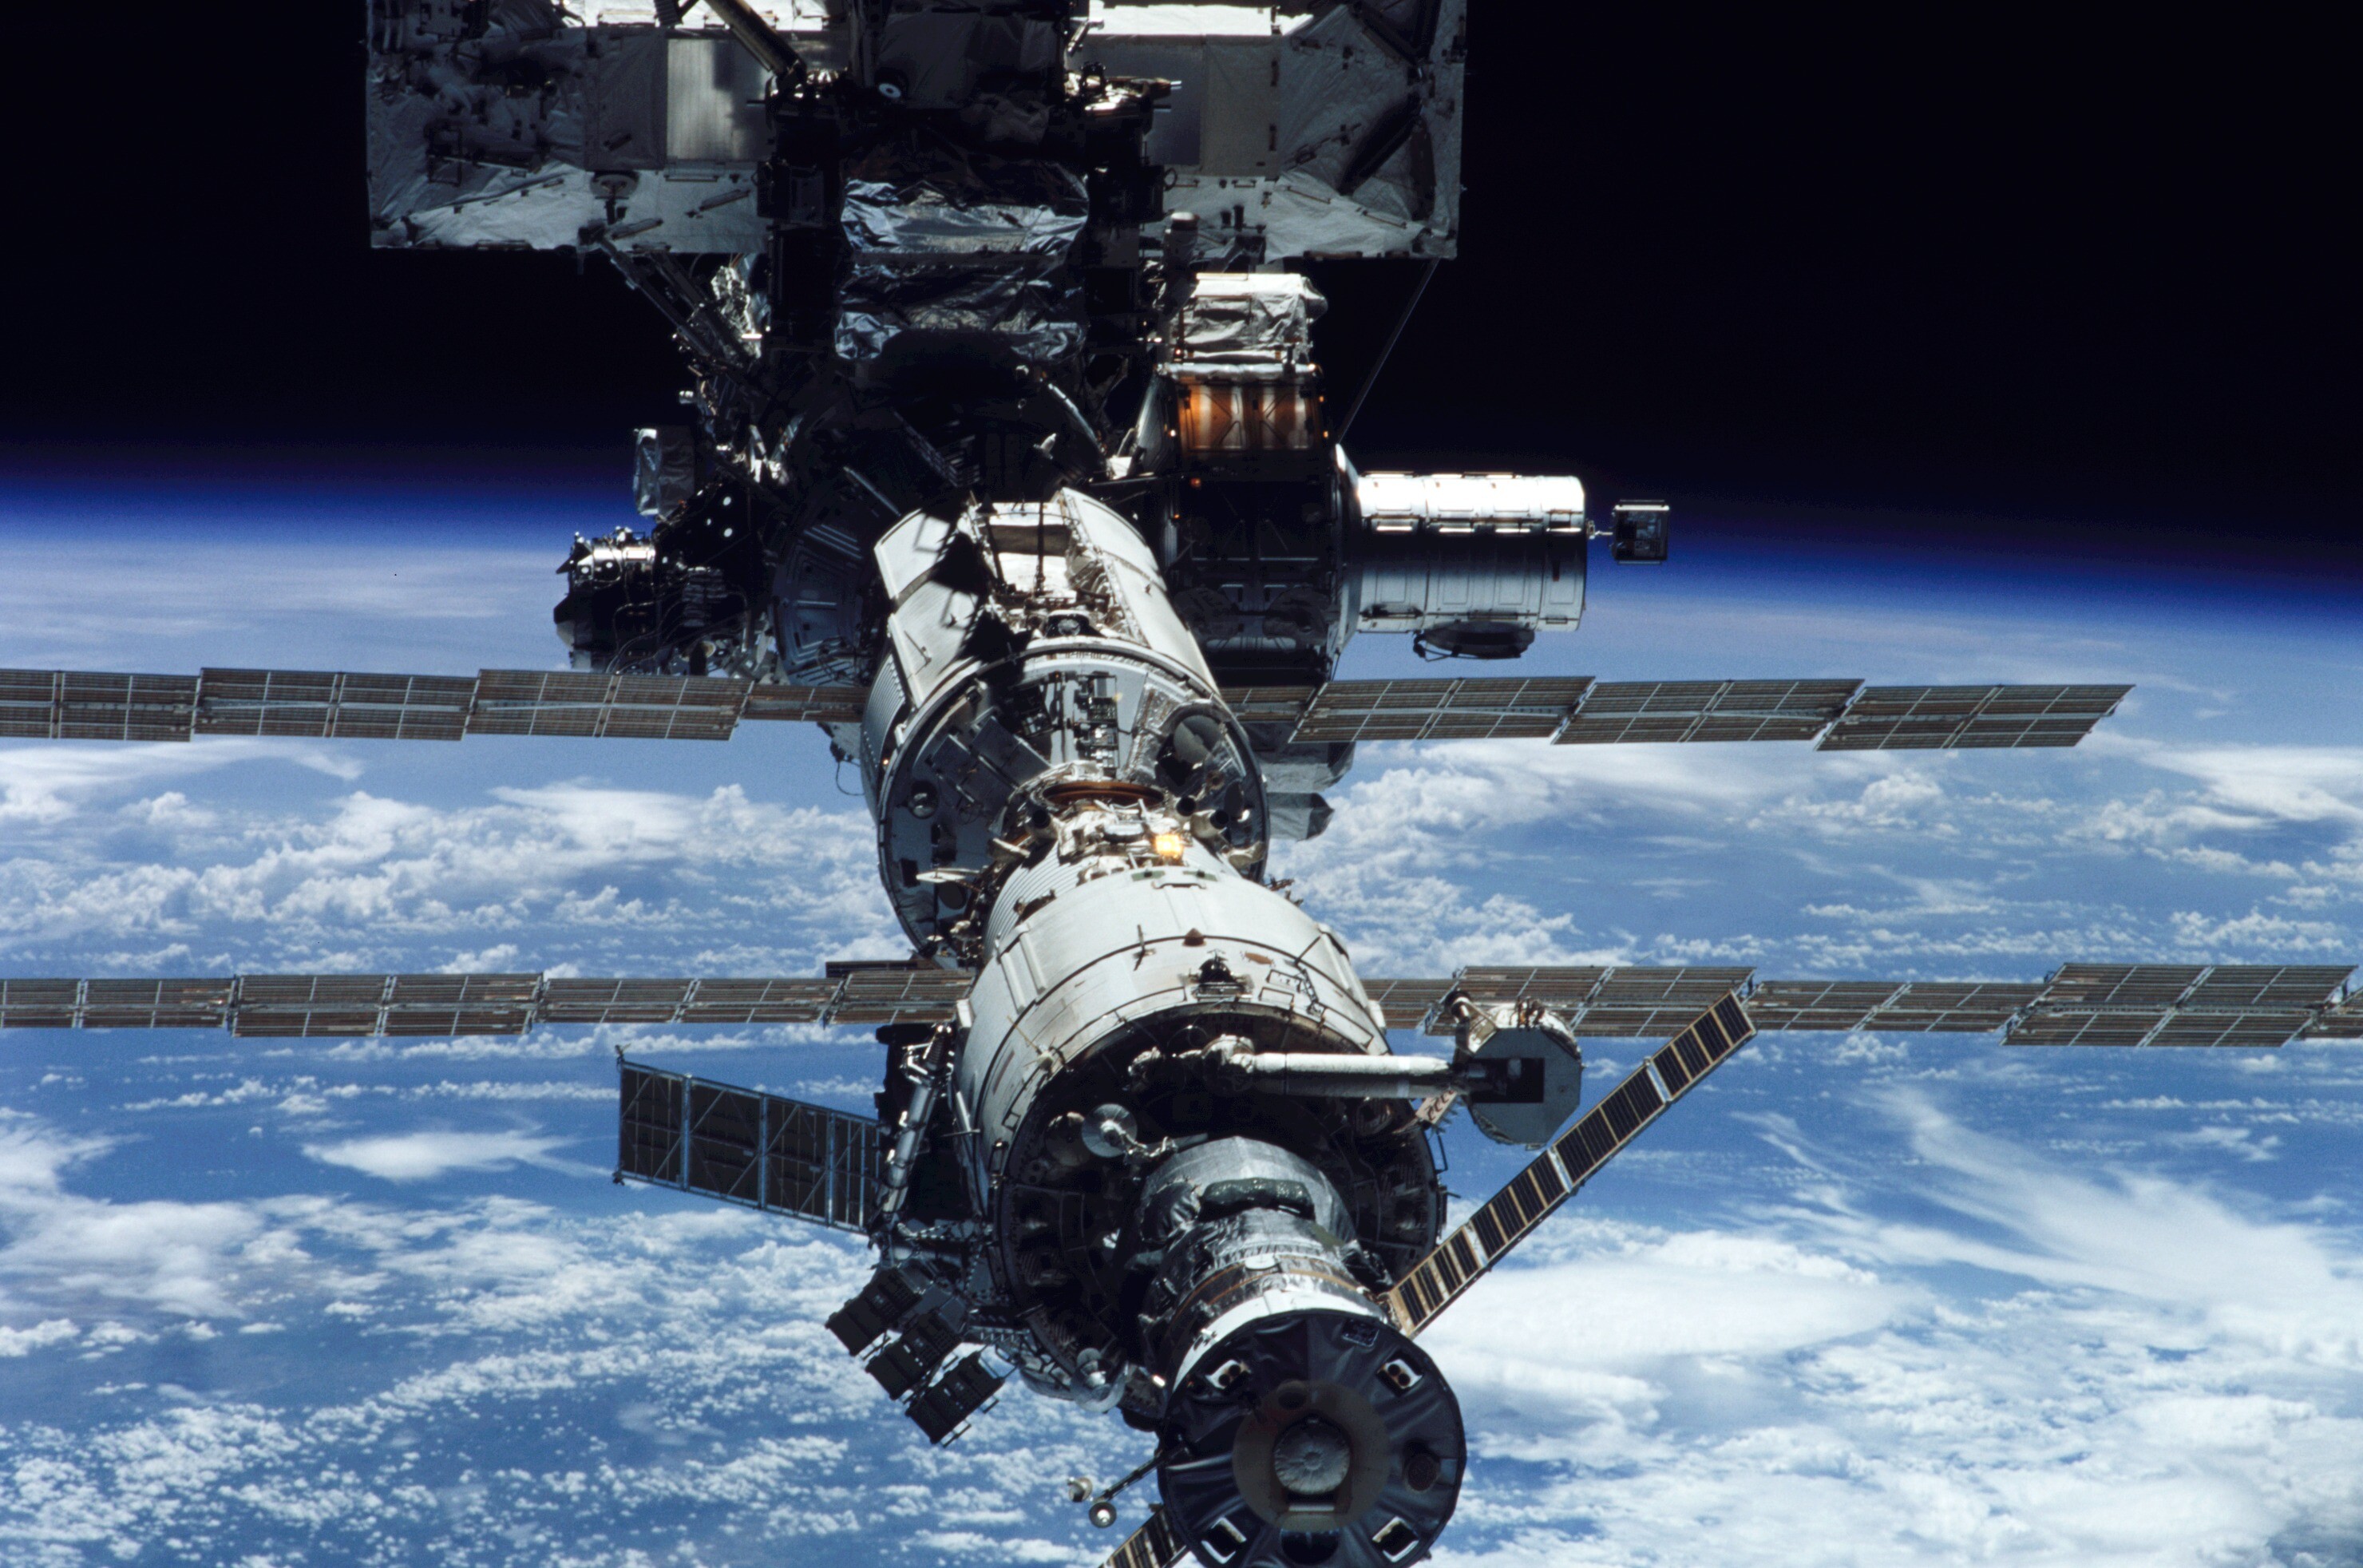 International Space Station: ISS, A co-operative program between Europe, the United States, Russia, Canada and Japan. 2960x1970 HD Wallpaper.